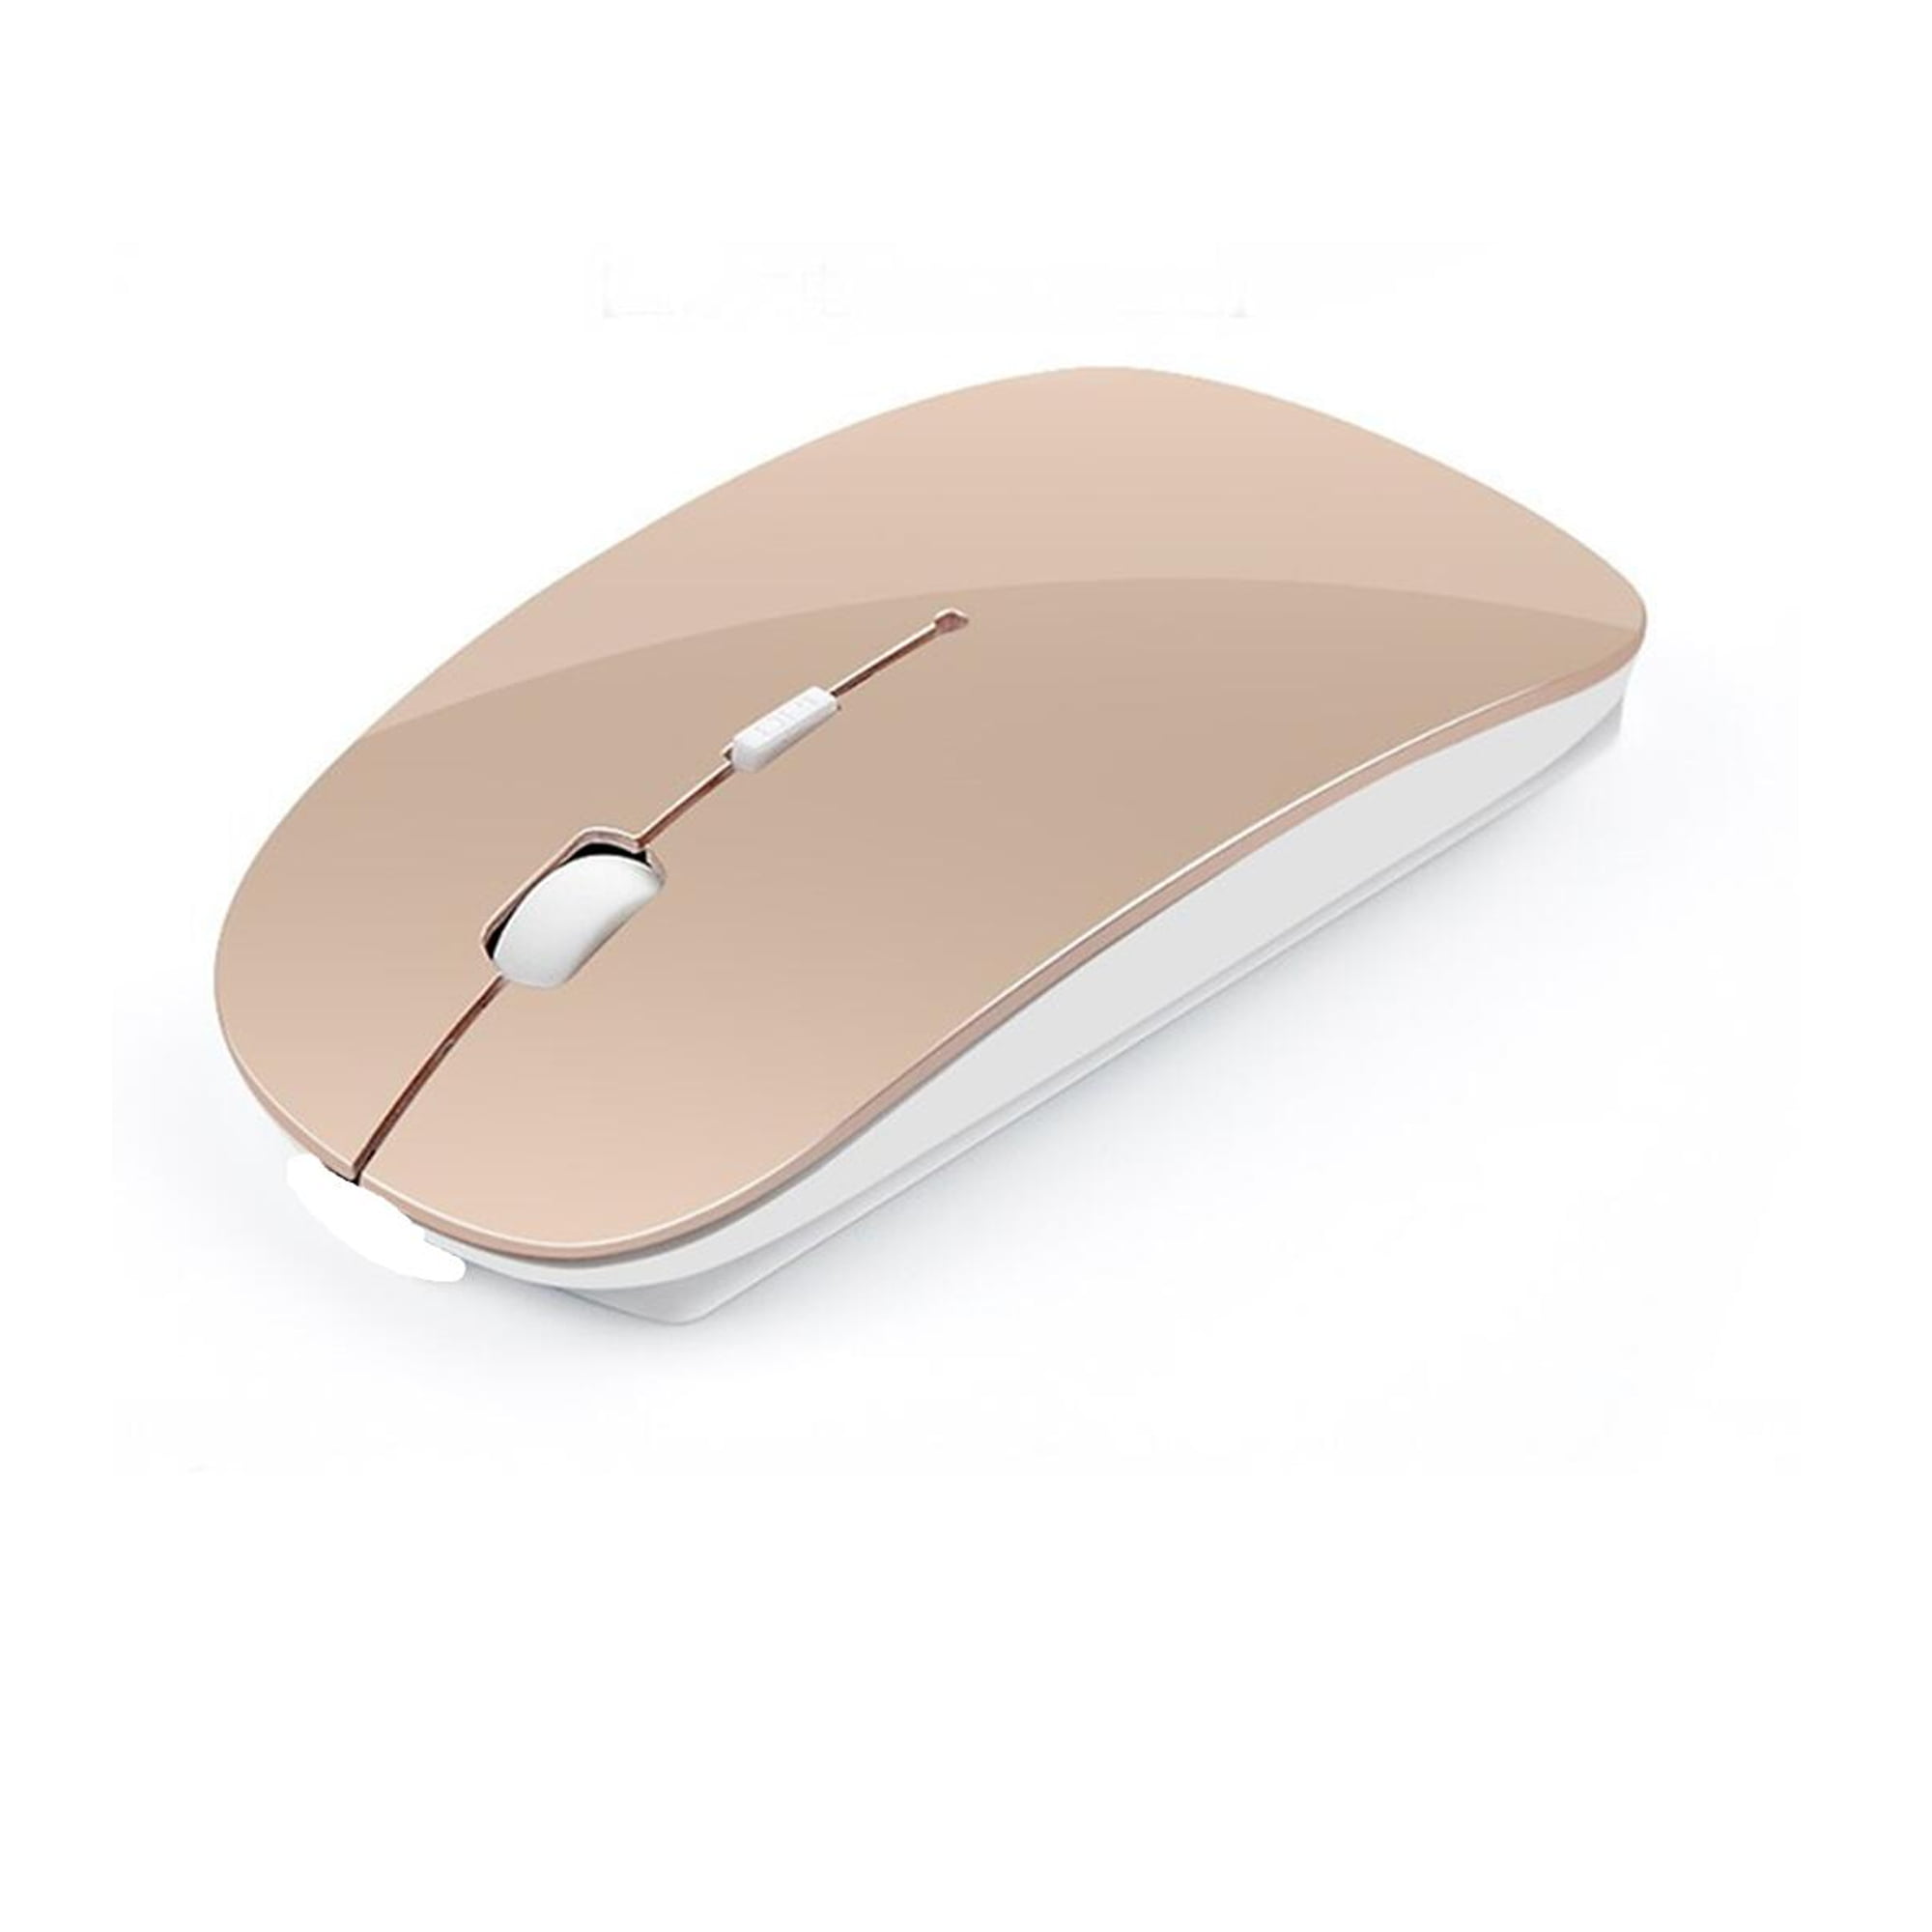 Slim 2.4GHz USB Wireless Optical Mouse Lightweight Mice For Mac For PC Laptop 